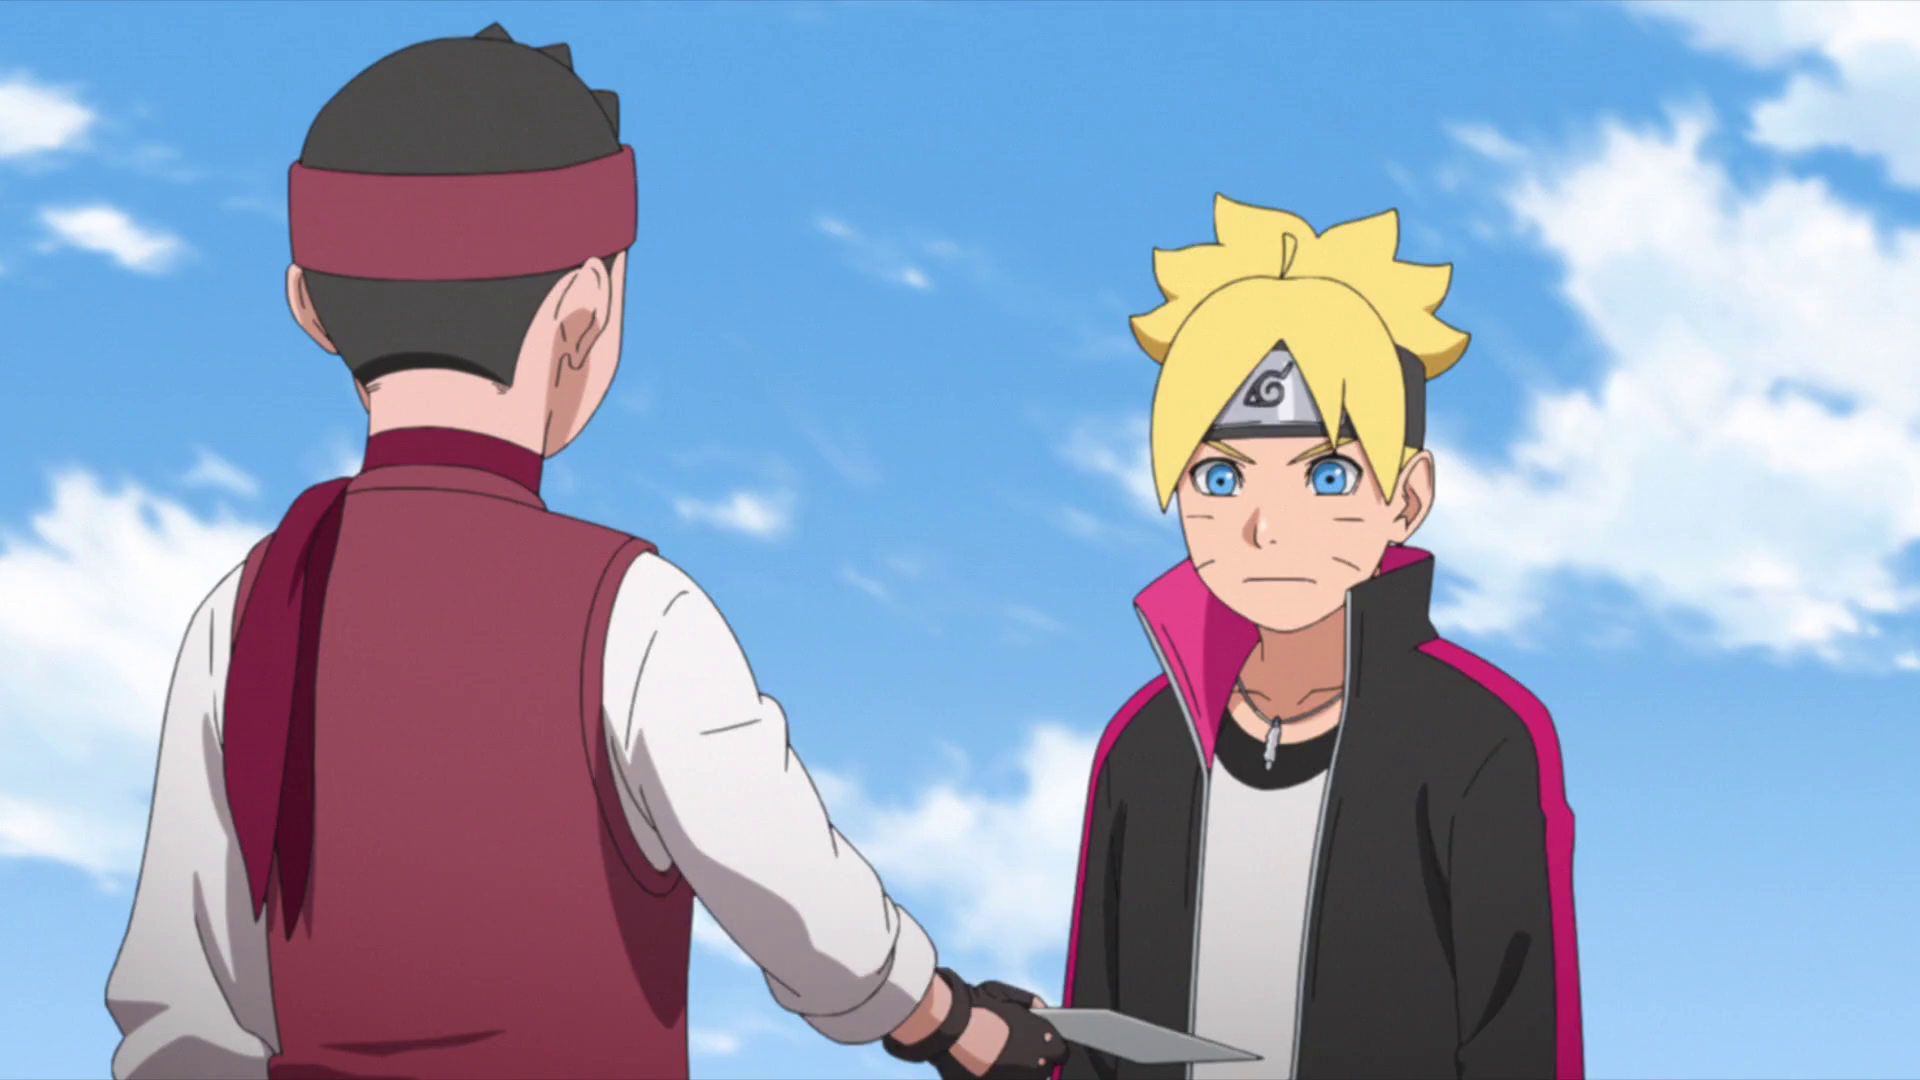 Listen to Boruto Naruto The Movie Song [END] by ShamWow in Anime